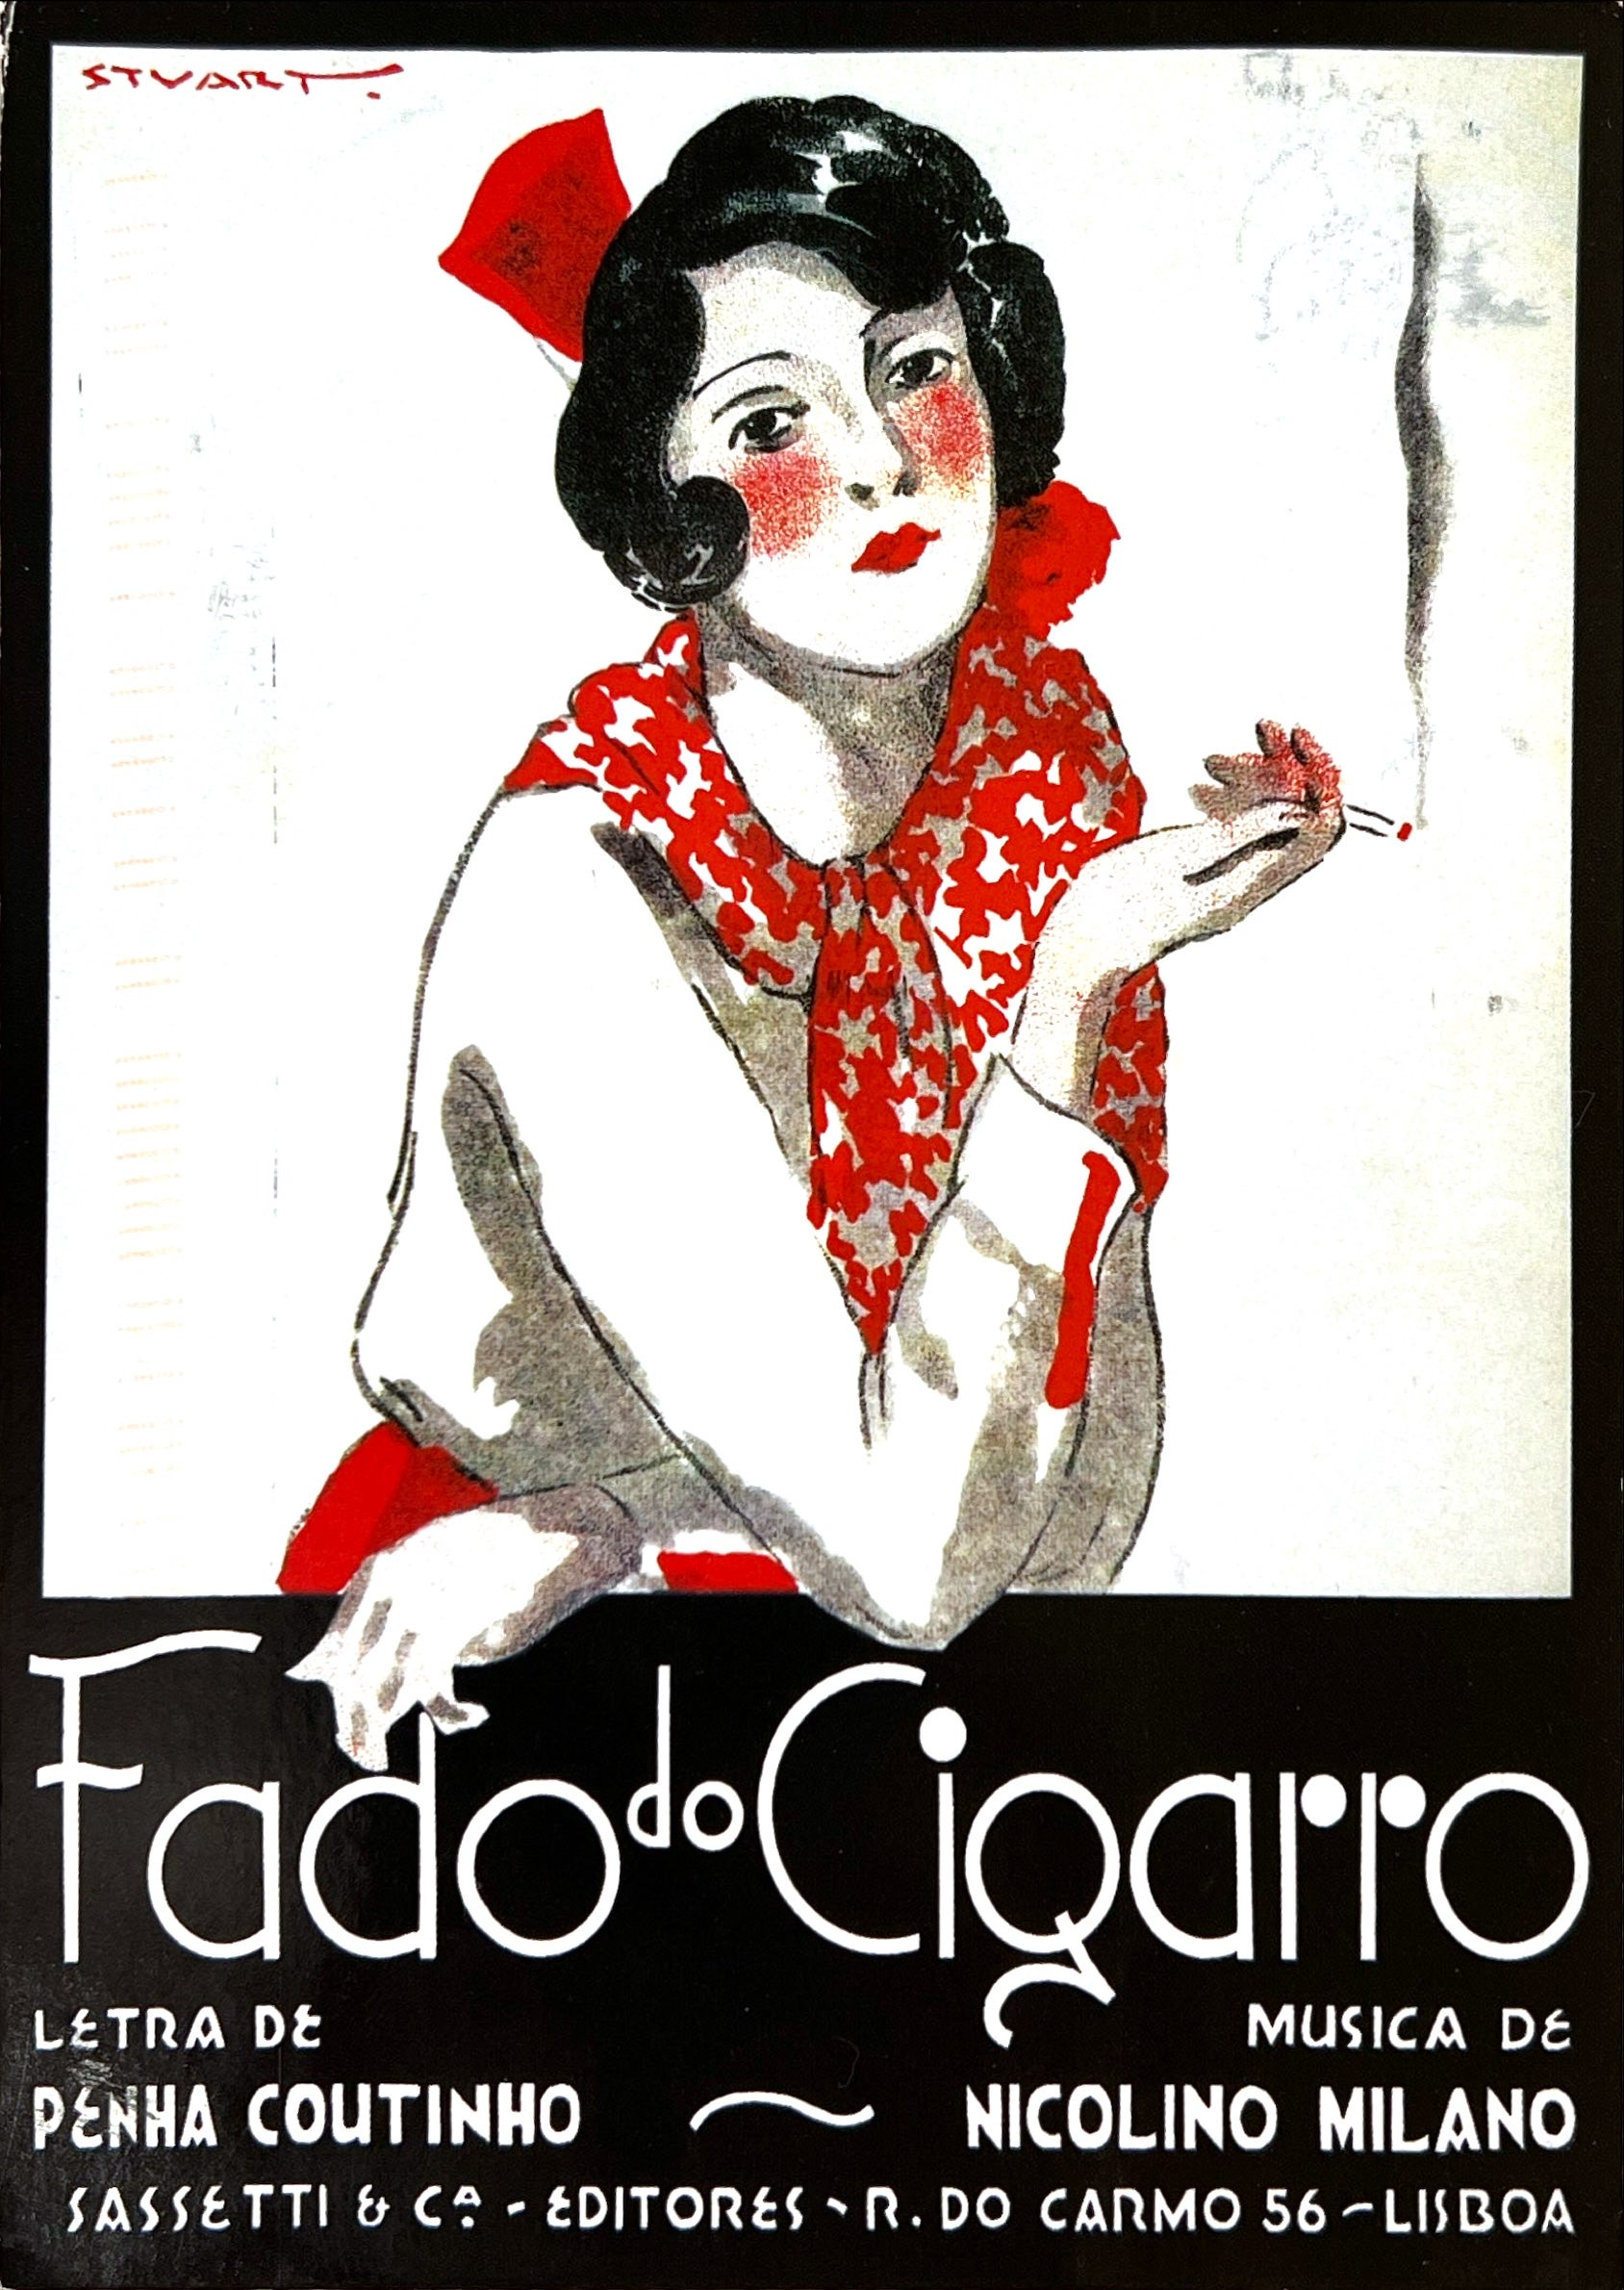 Older style illustration of a woman smoking a cigarette, with caption in foreign language.